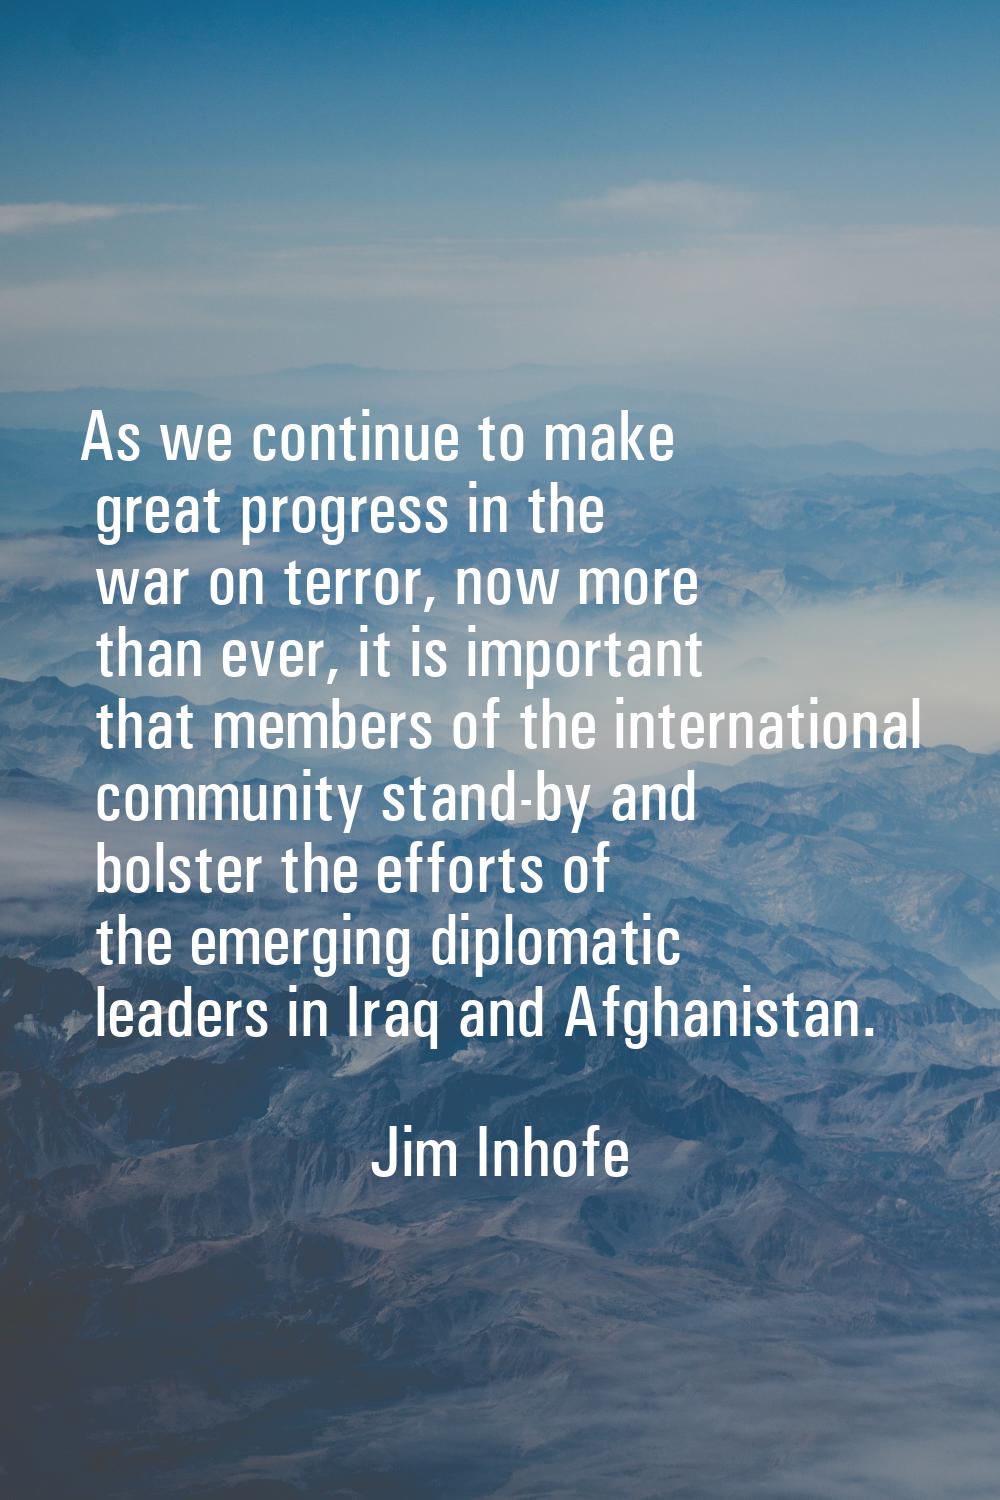 As we continue to make great progress in the war on terror, now more than ever, it is important tha